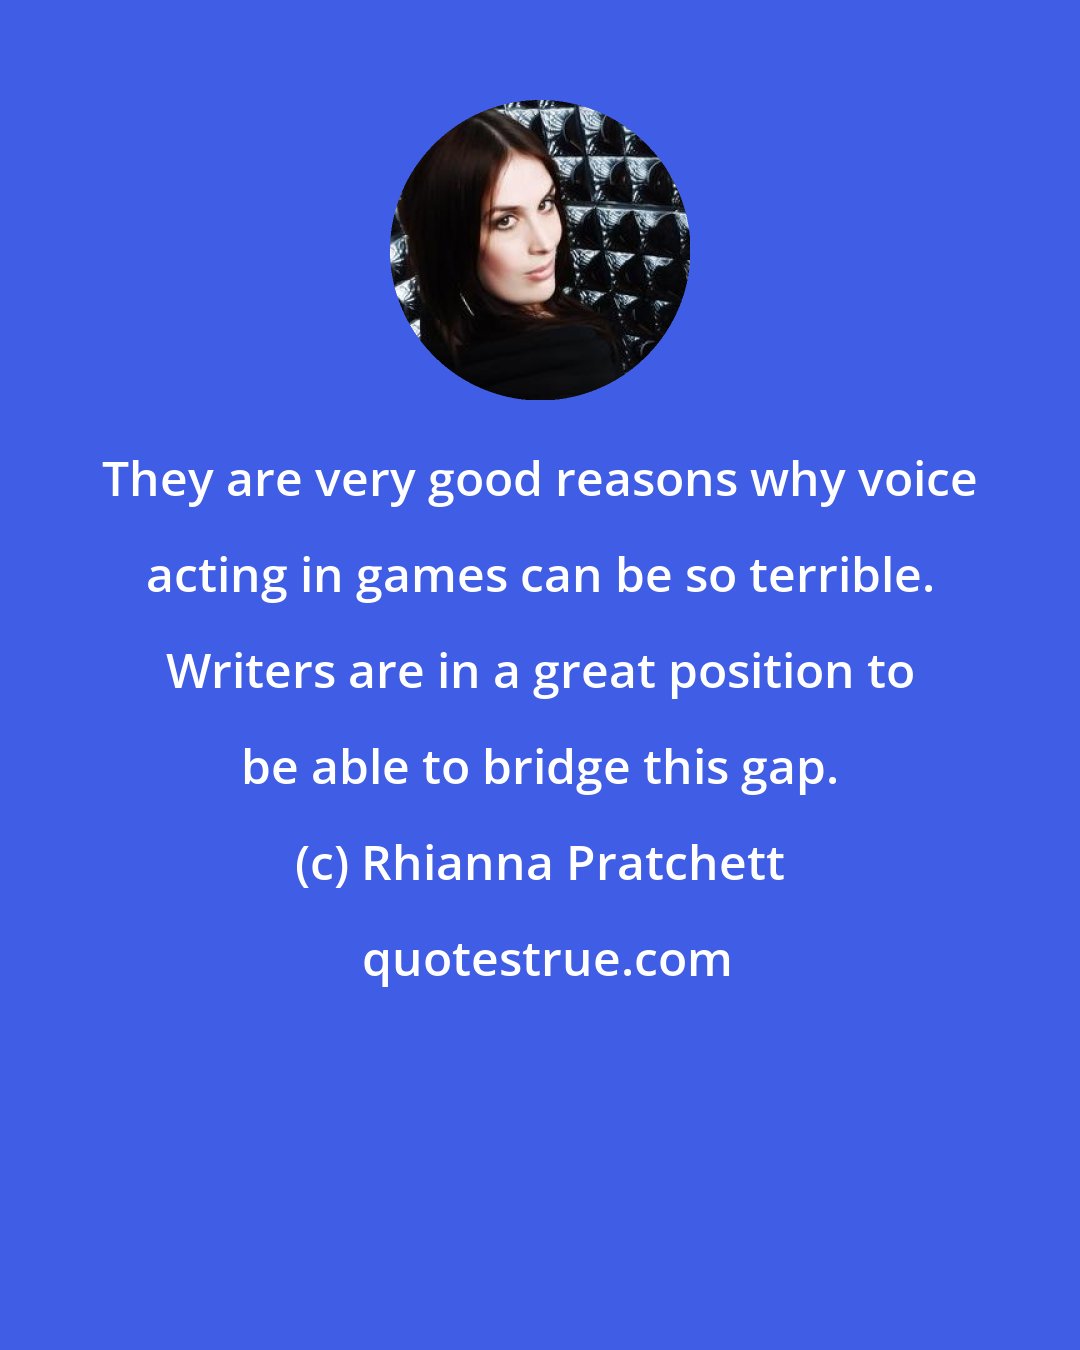 Rhianna Pratchett: They are very good reasons why voice acting in games can be so terrible. Writers are in a great position to be able to bridge this gap.